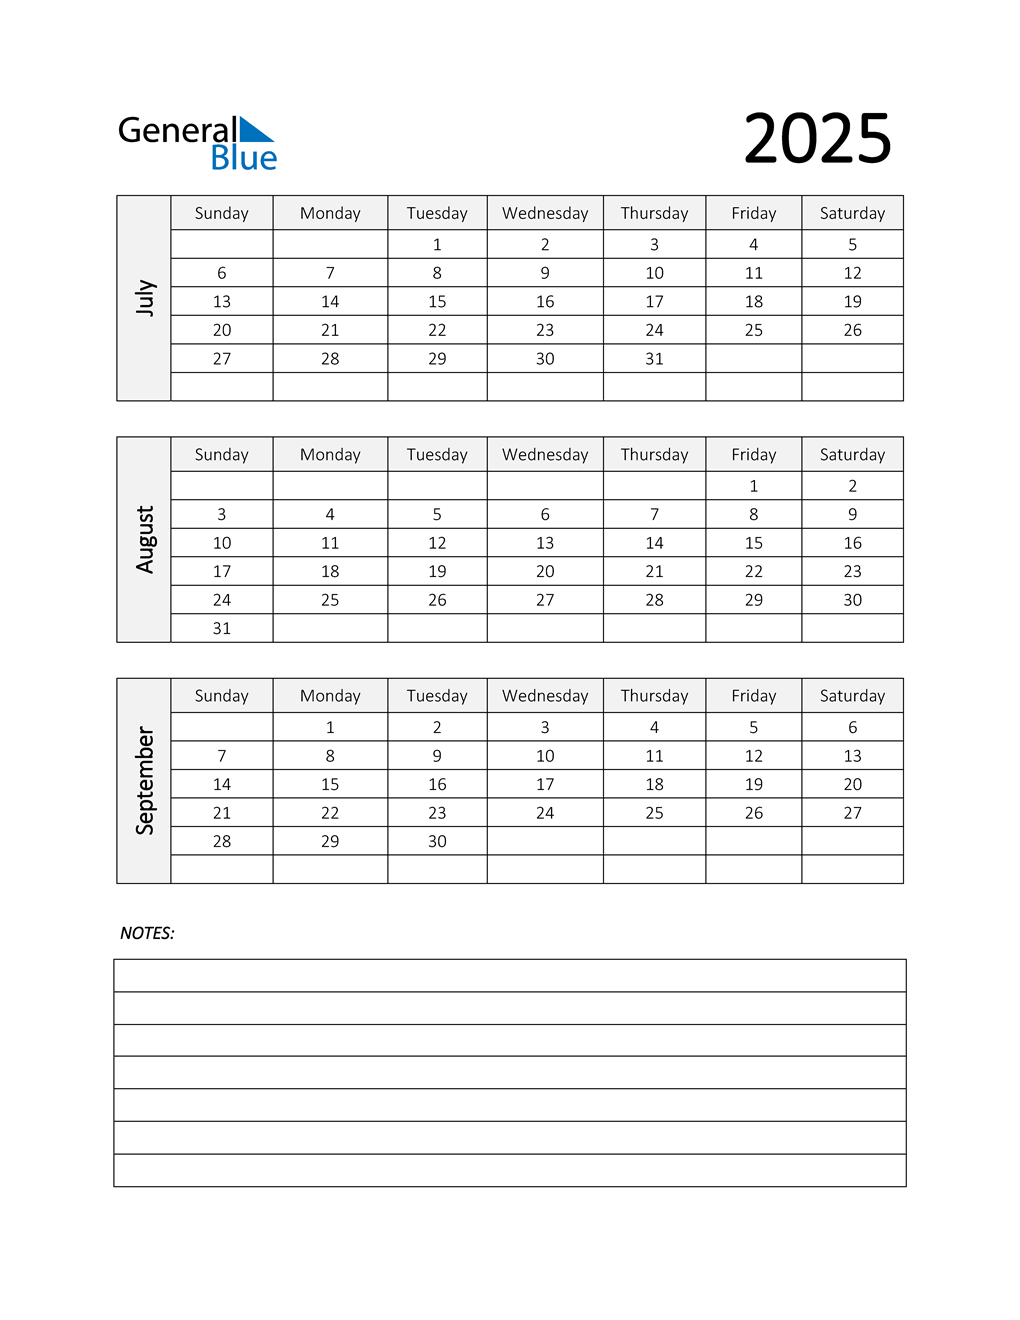  Q3 2025 Calendar with Notes